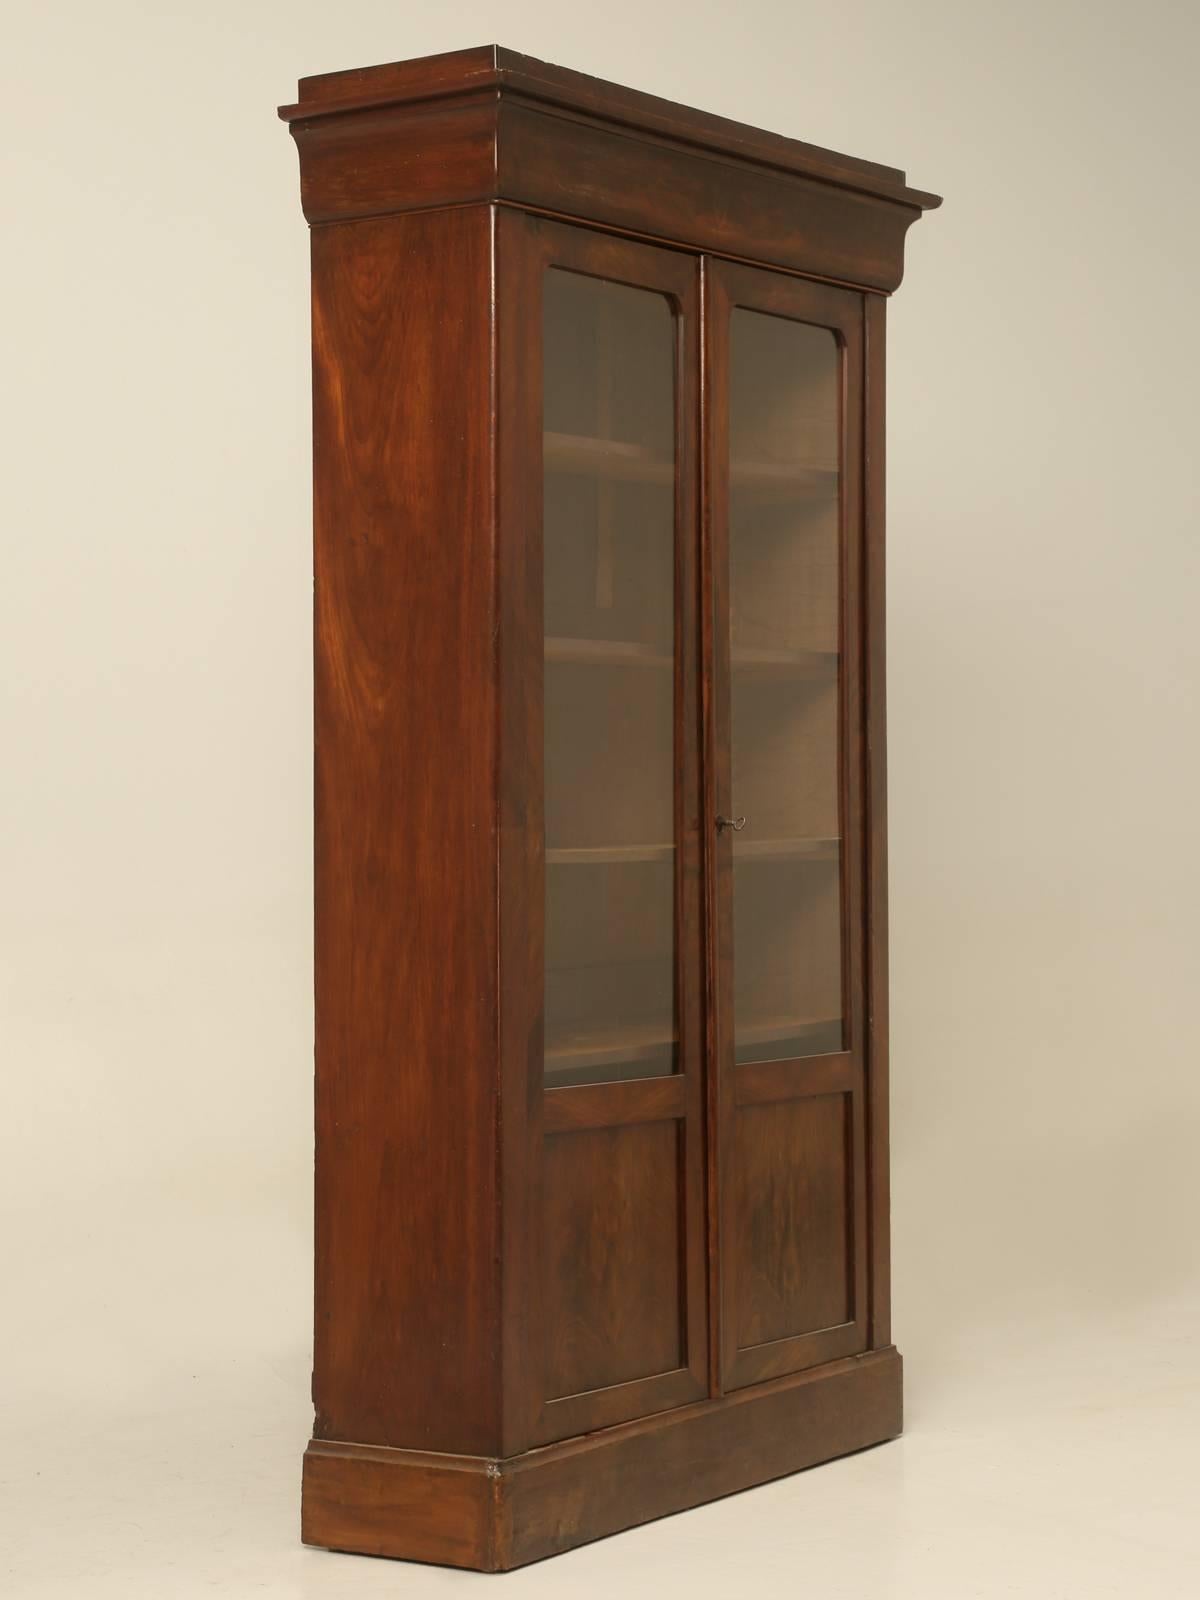 Antique French Louis Philippe style bookcase, in mahogany and in an unusual petite size, which should make it easy to fit almost anywhere. The French bookcase was received in such a nice original condition and other than tightening things up a bit,